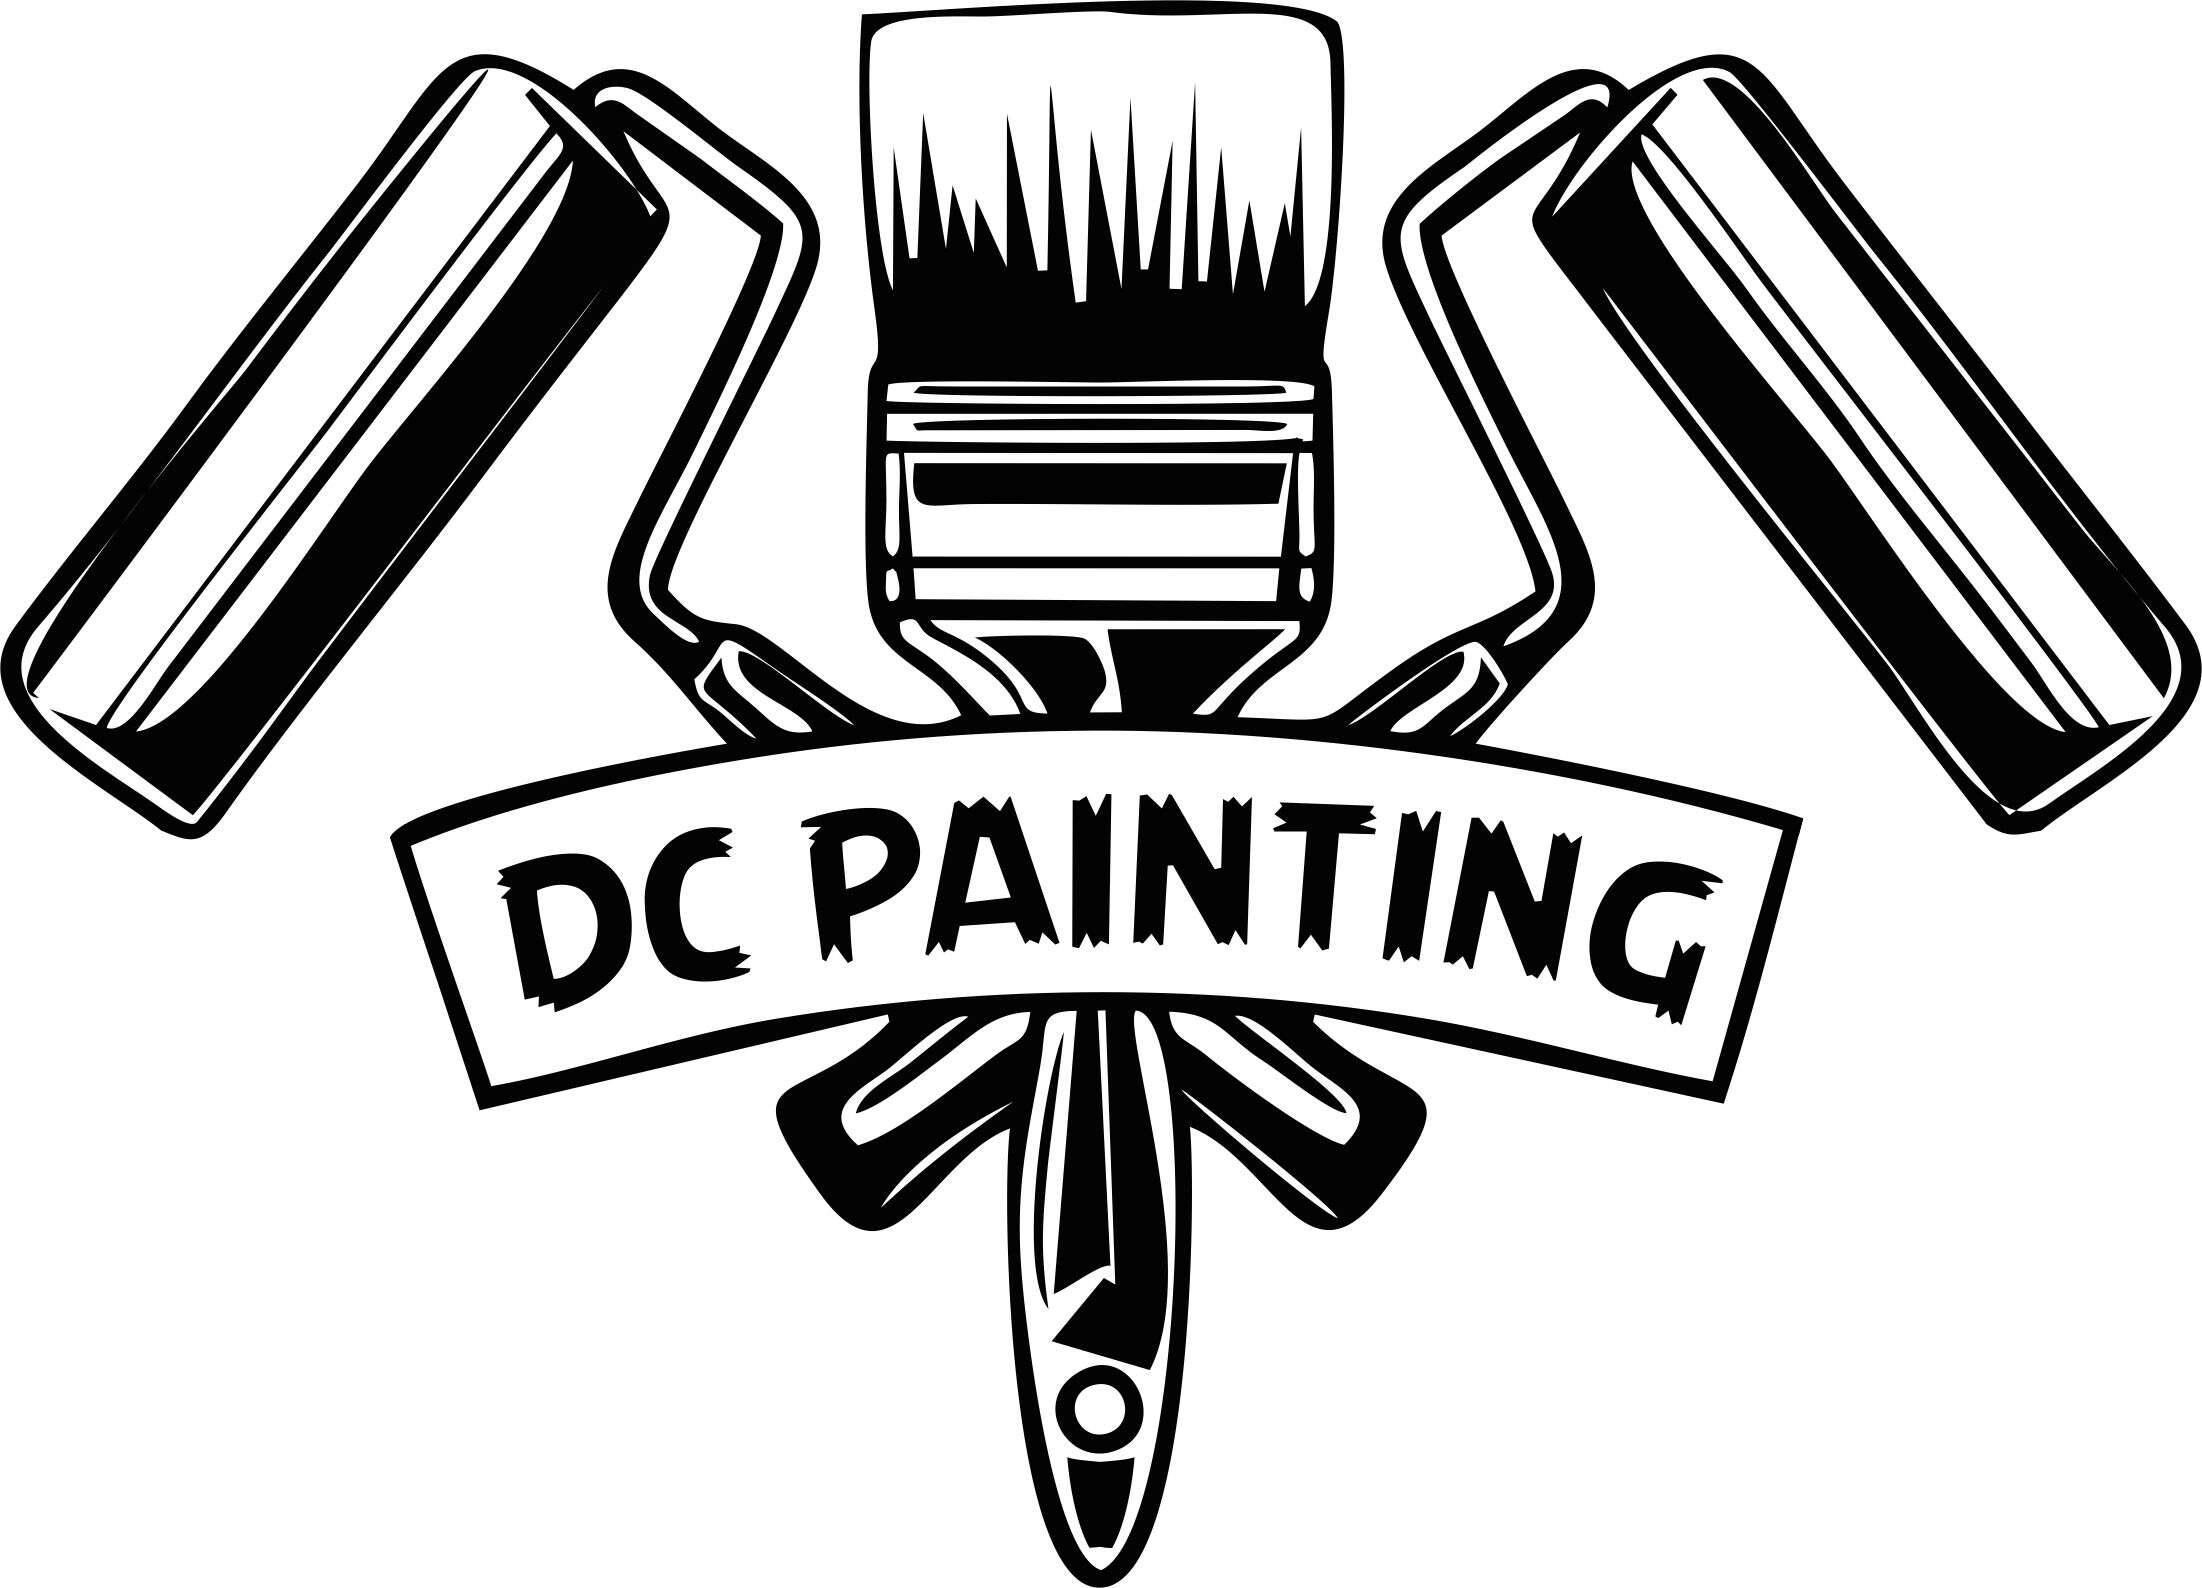 DC Painting